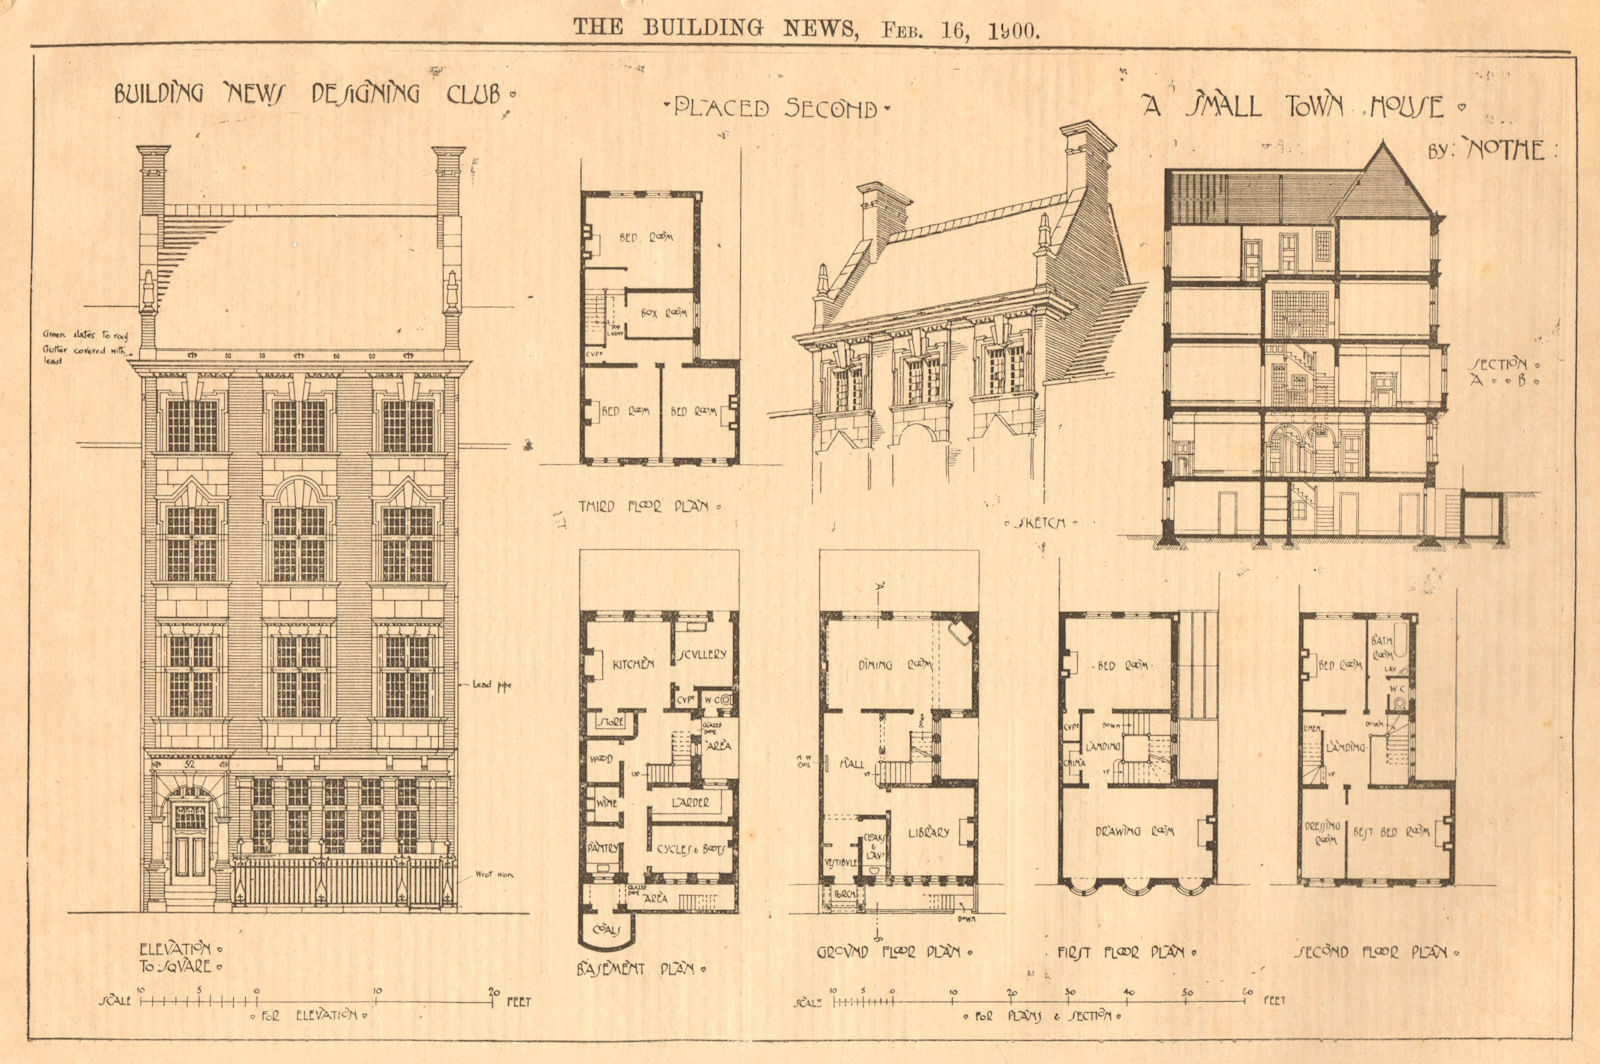 A small town house by Nothe. Elevation to Square, Basement plan 1900 old print